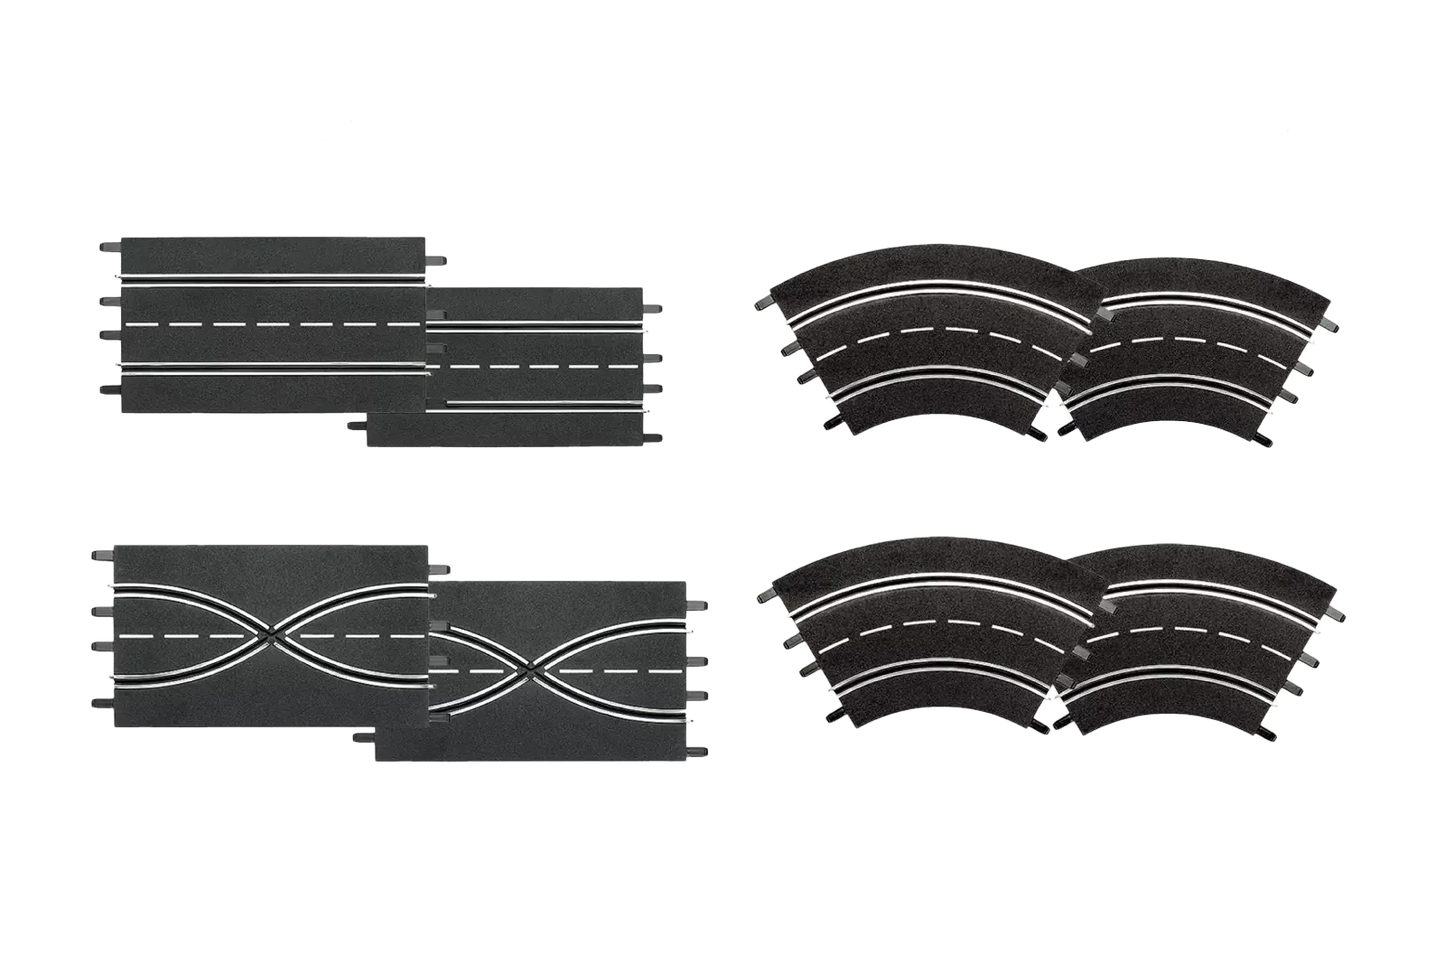 Extension set (2 straights, 2 lane change sections
(1:24 Scale)